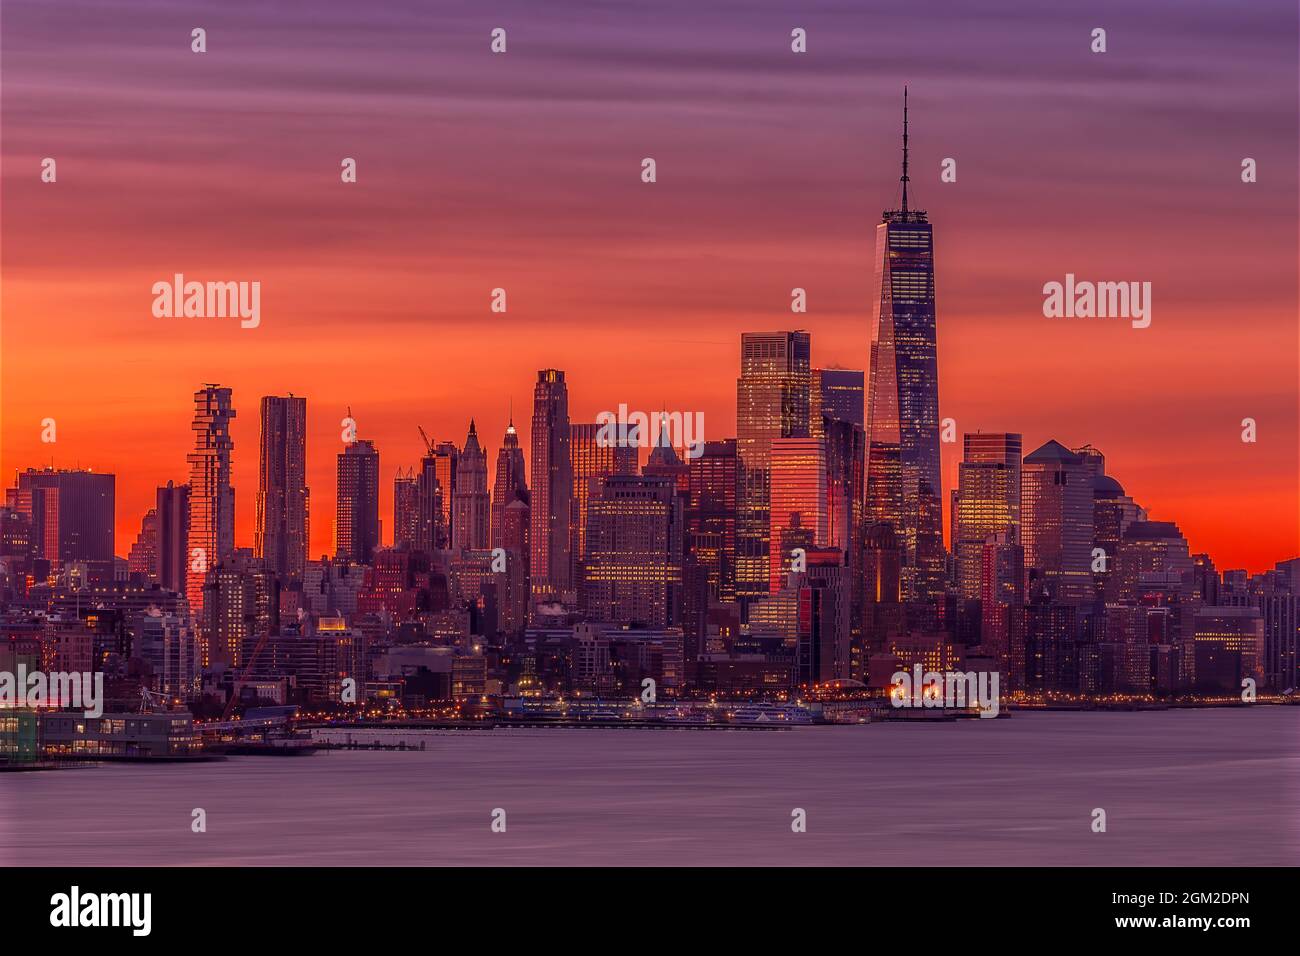 Manhattan NYC Awakens - The commonly referred to as the Freedom Tower at One World Trade Center along with the Financial District wake up to a spectac Stock Photo